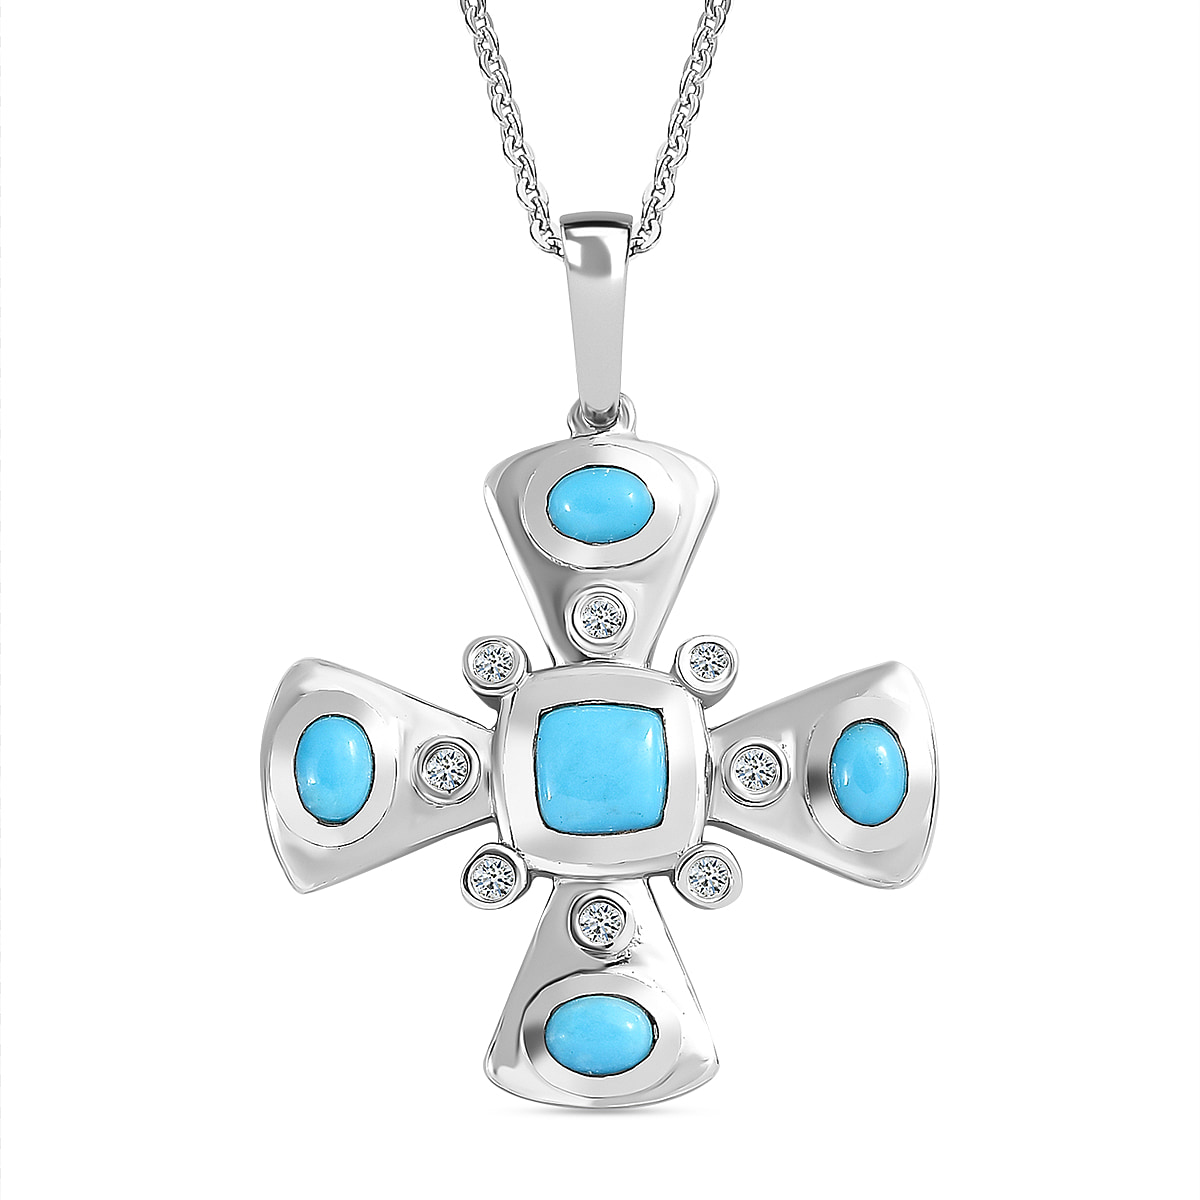 Arizona Sleeping Beauty Turquoise & Natural Zircon Cross Pendant with Chain (Size 20) in Platinum Overlay Sterling Silver 1.50 Ct, Silver Wt. 6.87 Gms